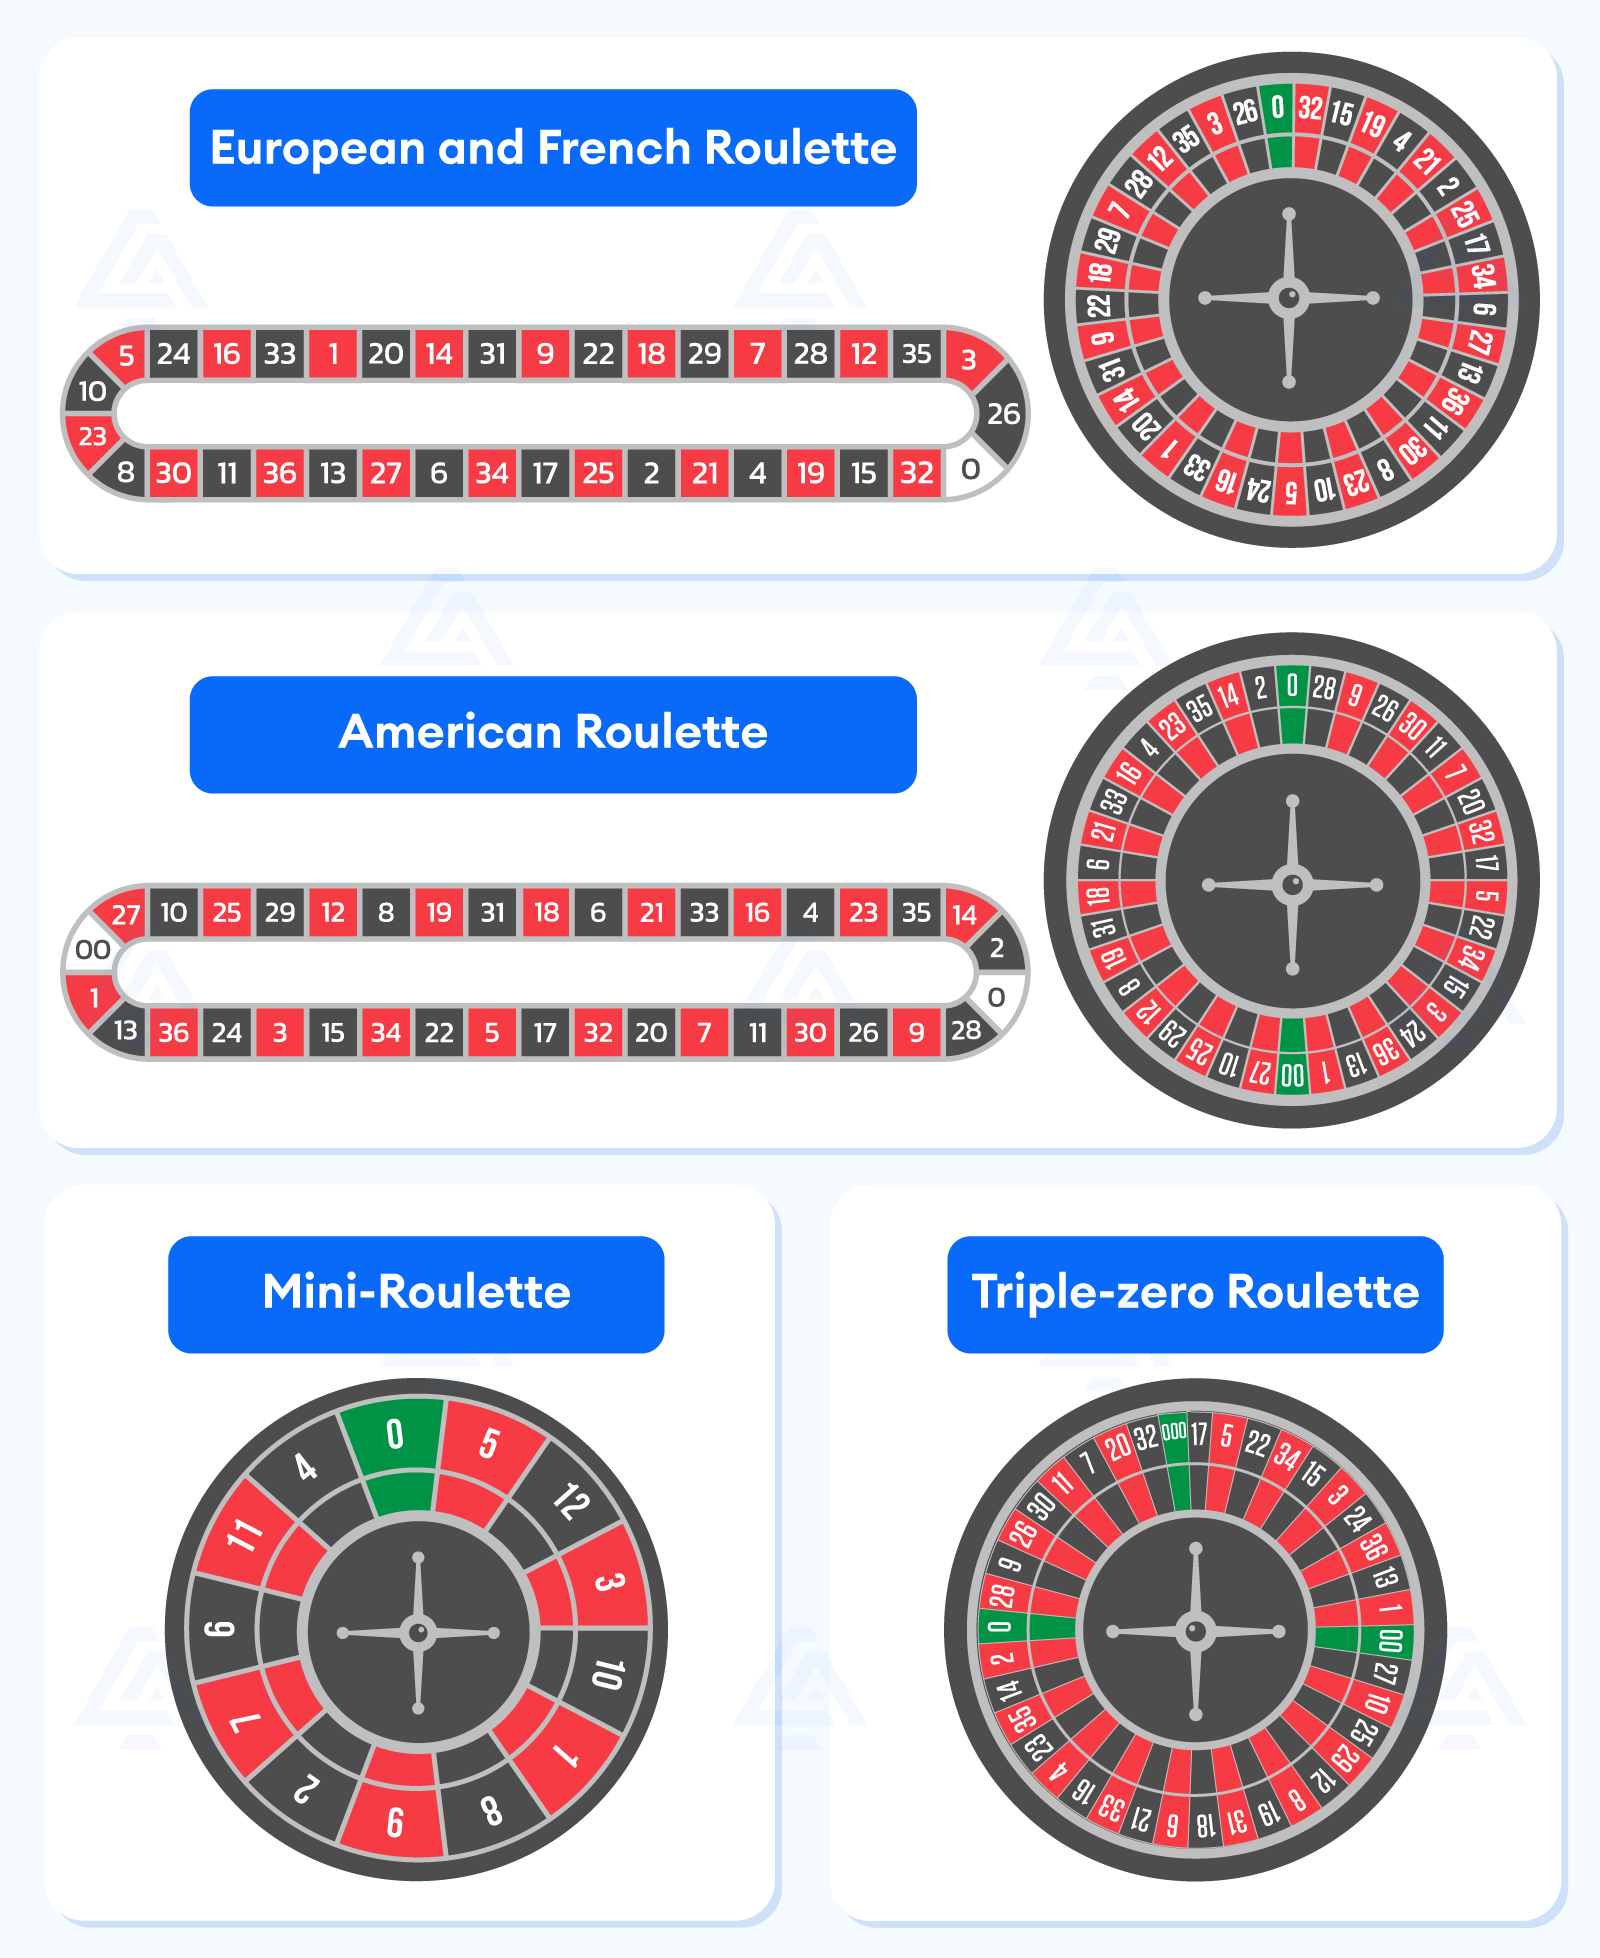 What are the common Roulette variants?